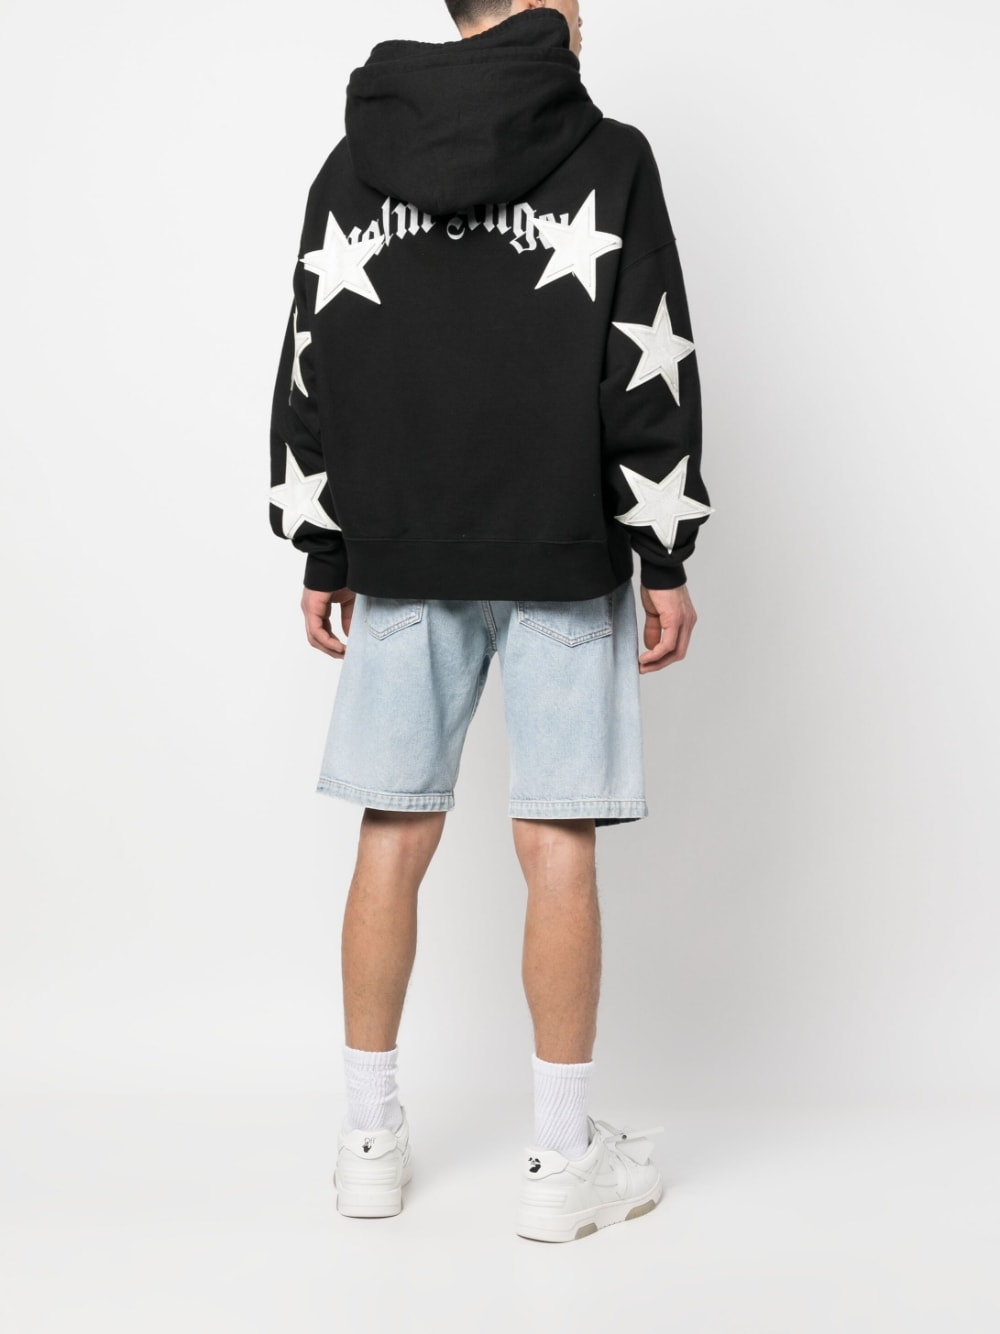 PATCHED STARS VINT HOODY BLACK WHITE